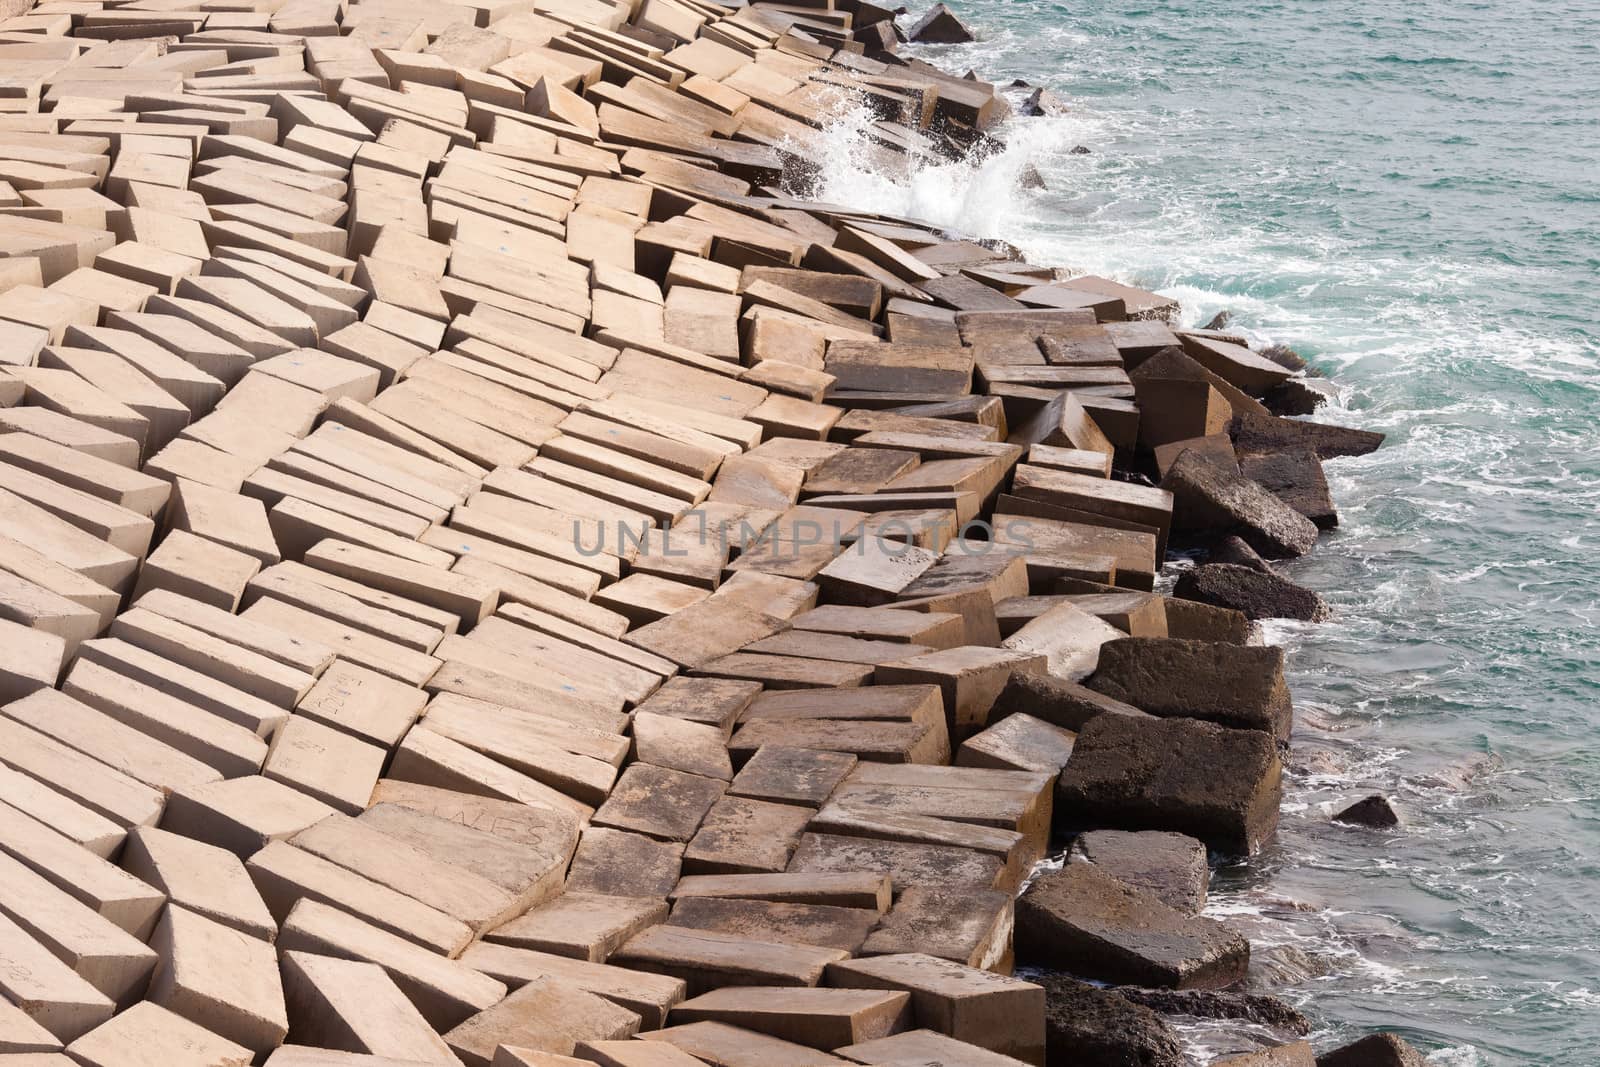 Concrete blocks laid haphazardly forming a protective coastal seawall to prevent erosion from tides and waves as an architectural abstract